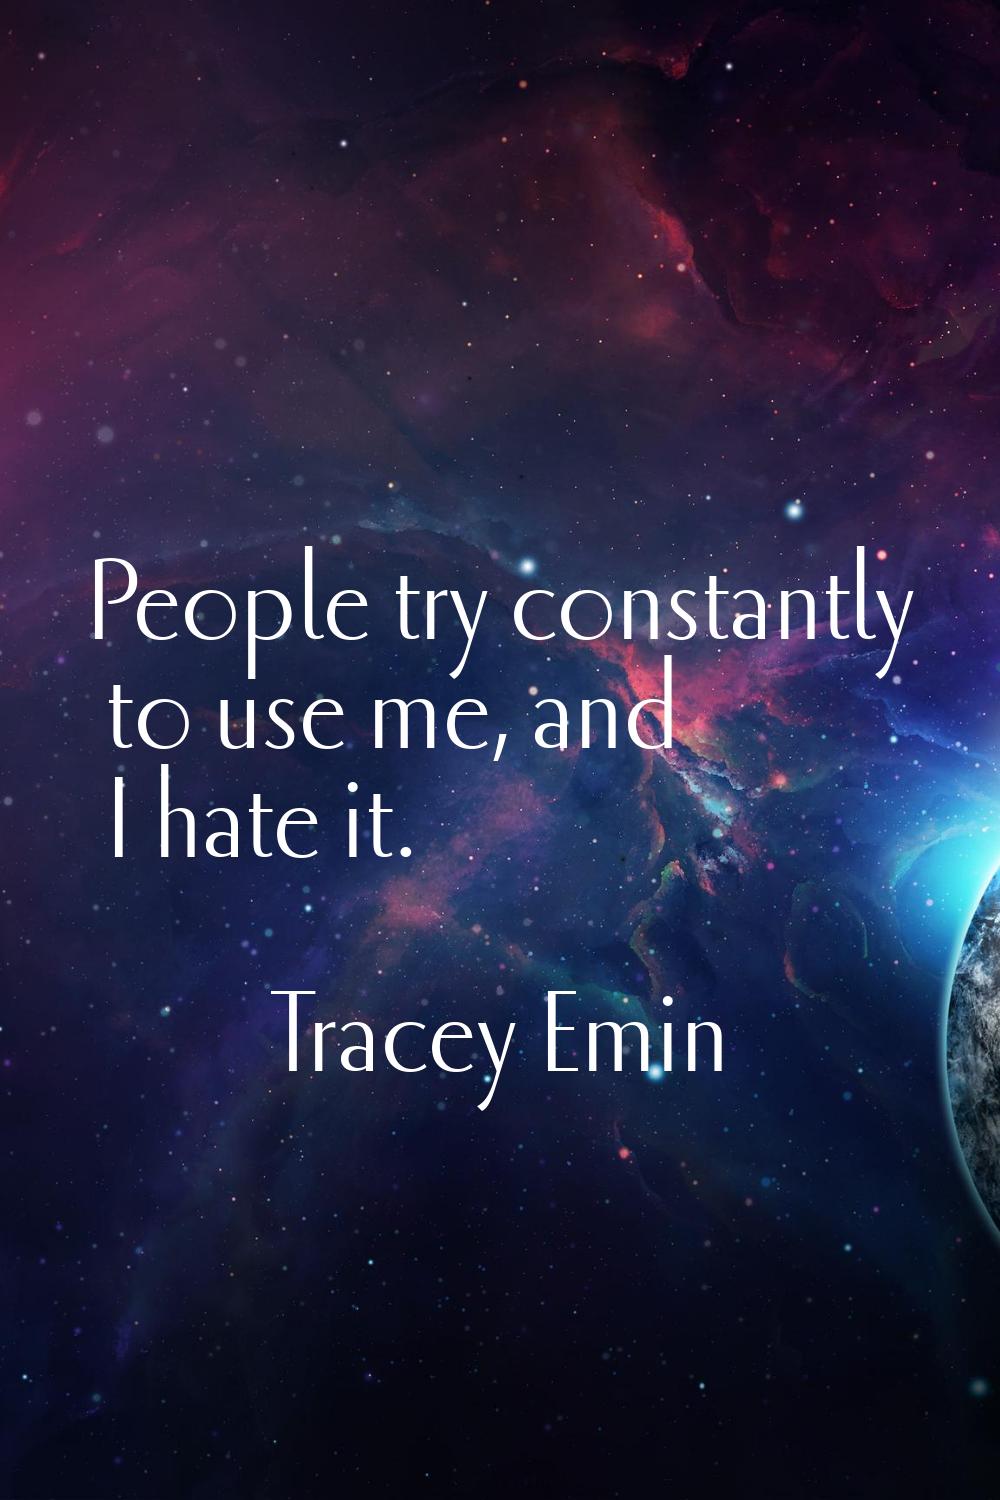 People try constantly to use me, and I hate it.